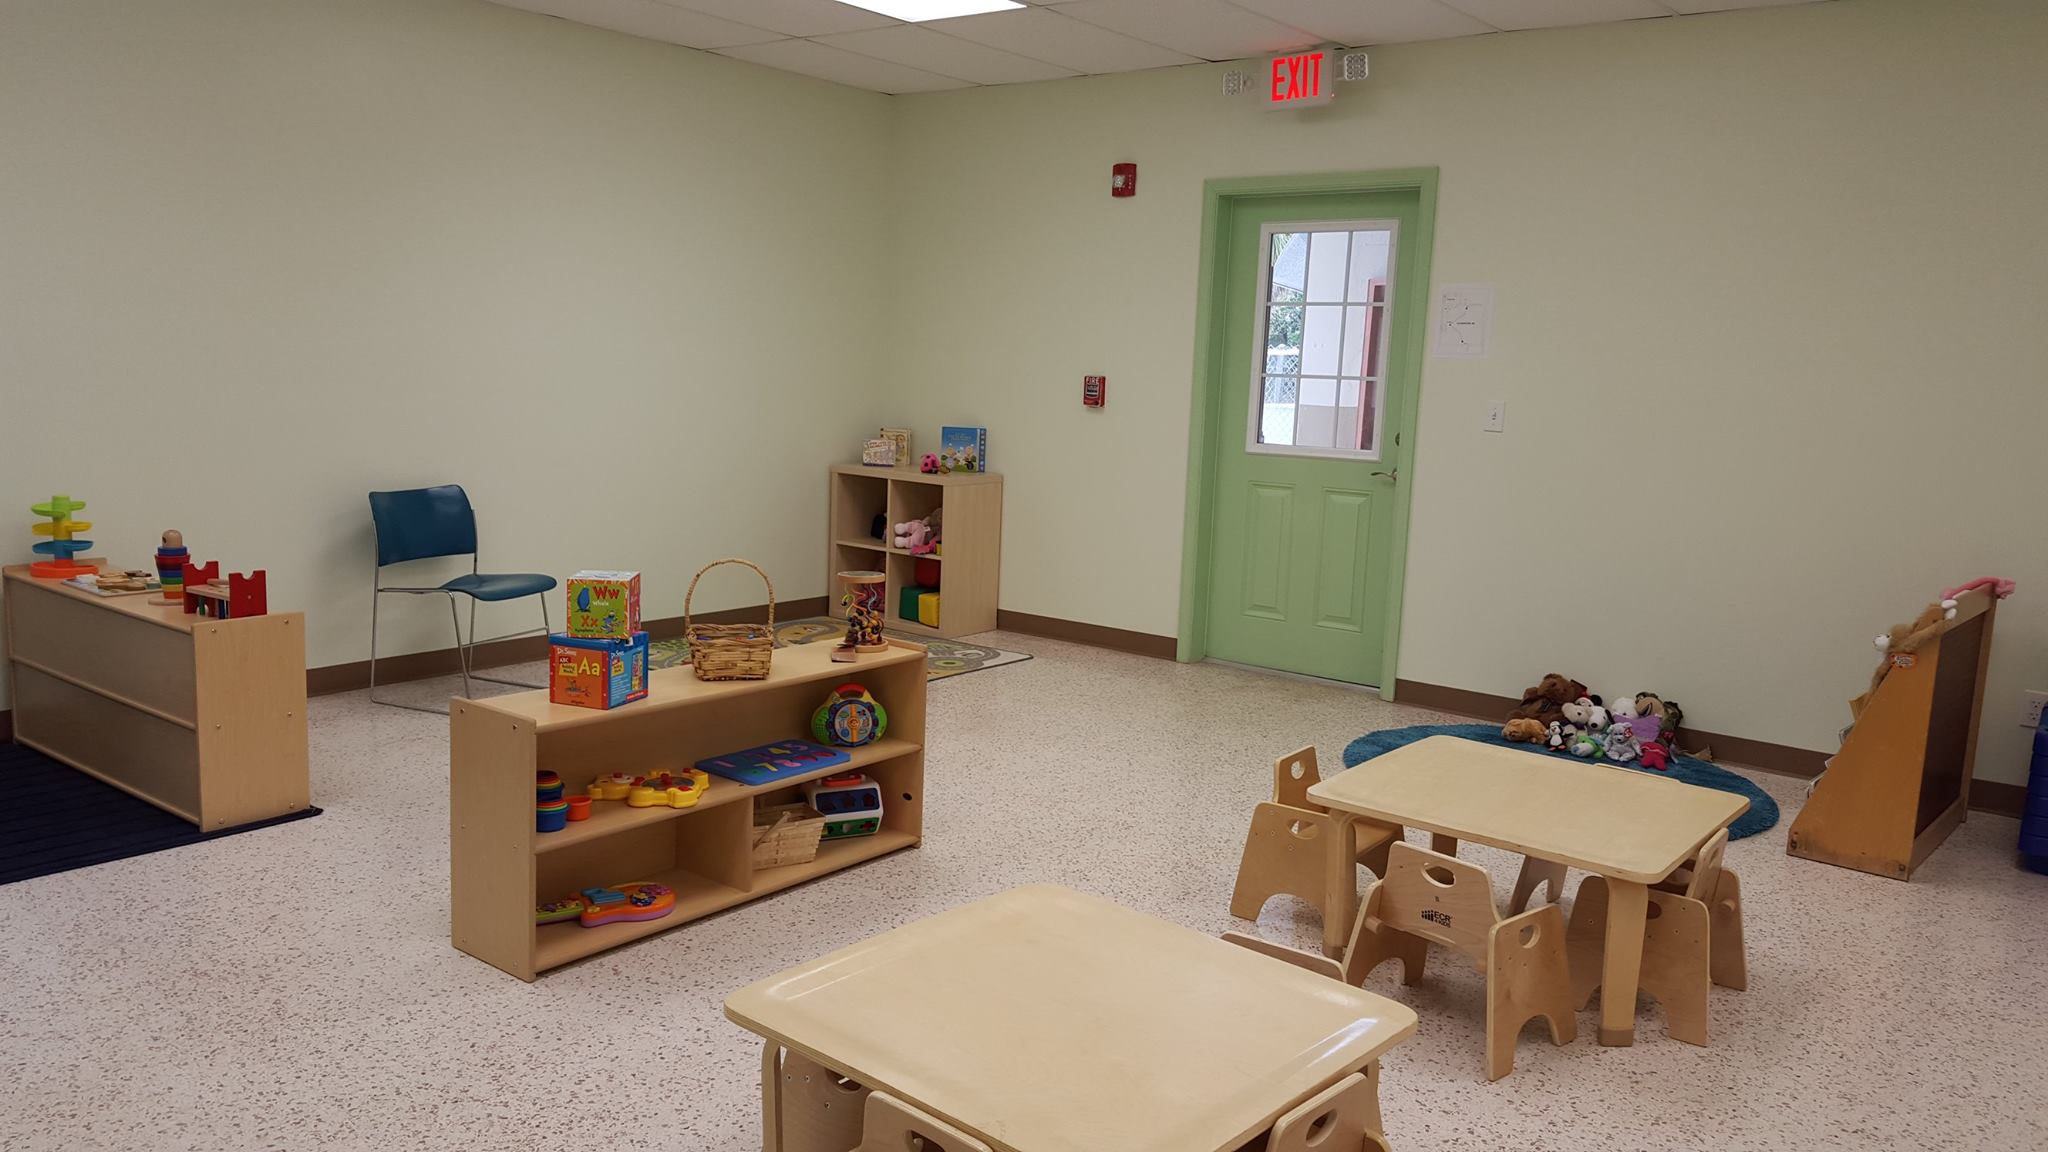 SunFlower Learning Center - West Palm Beach Educations